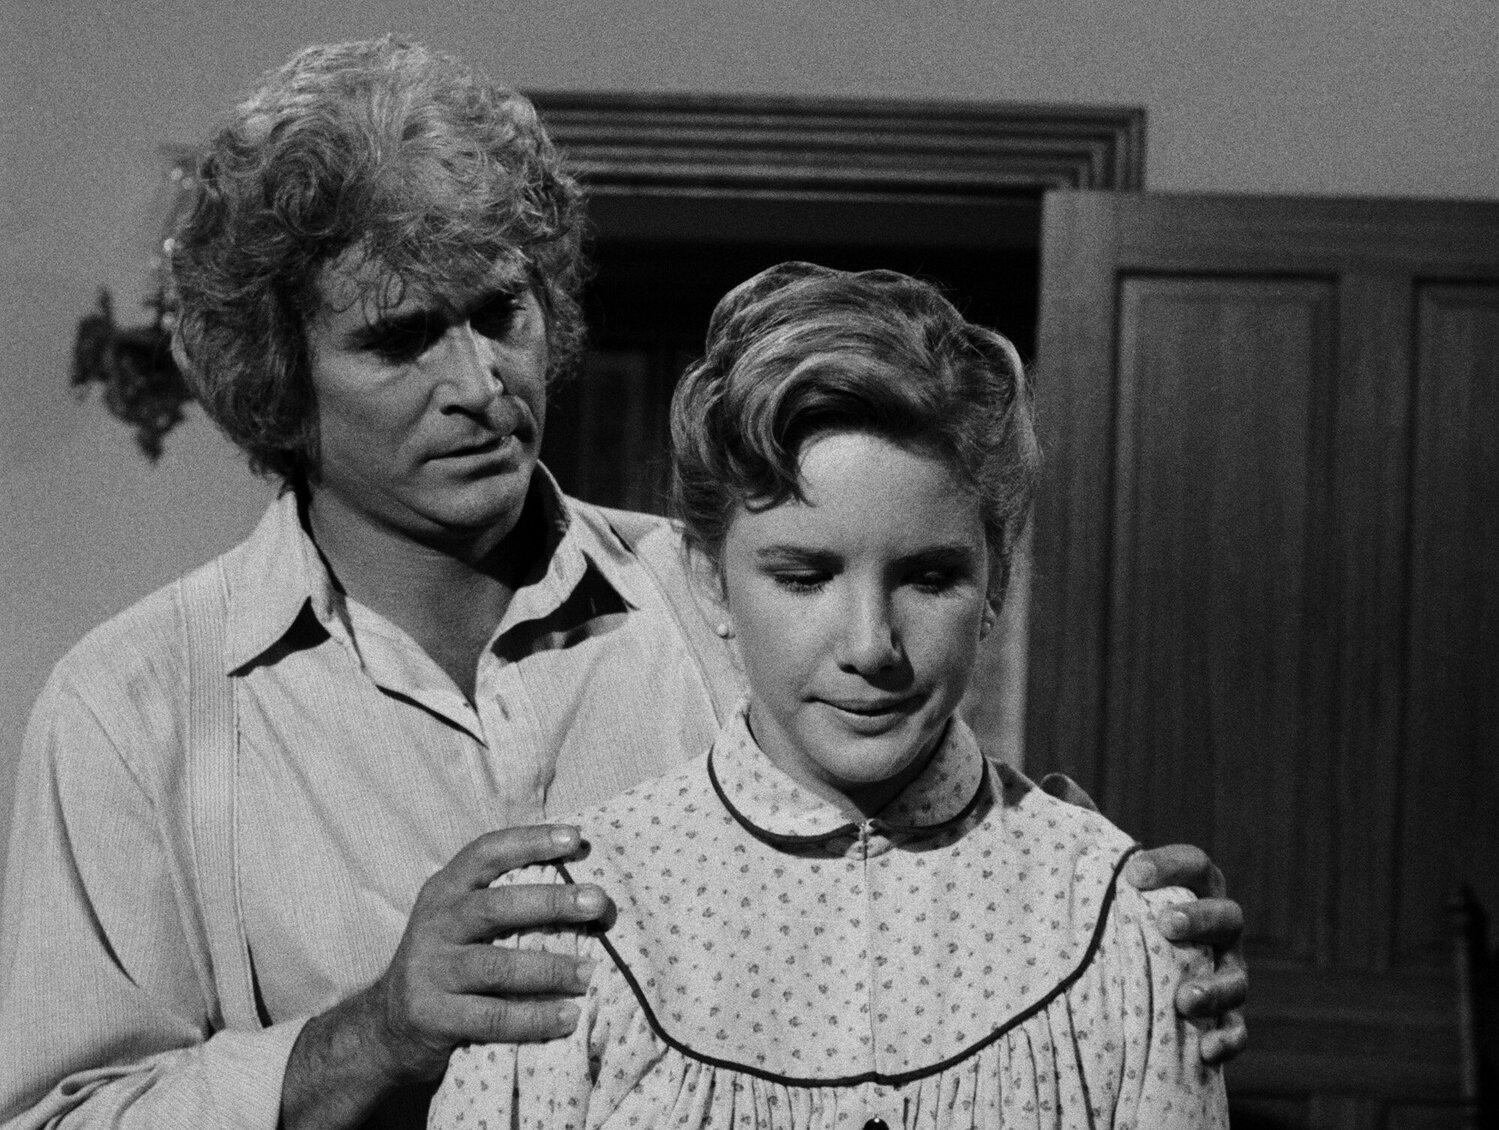 Michael Landon and Melissa Gilbert in "Little House: Look Back to Yesterday" Air Date 12/12/1983